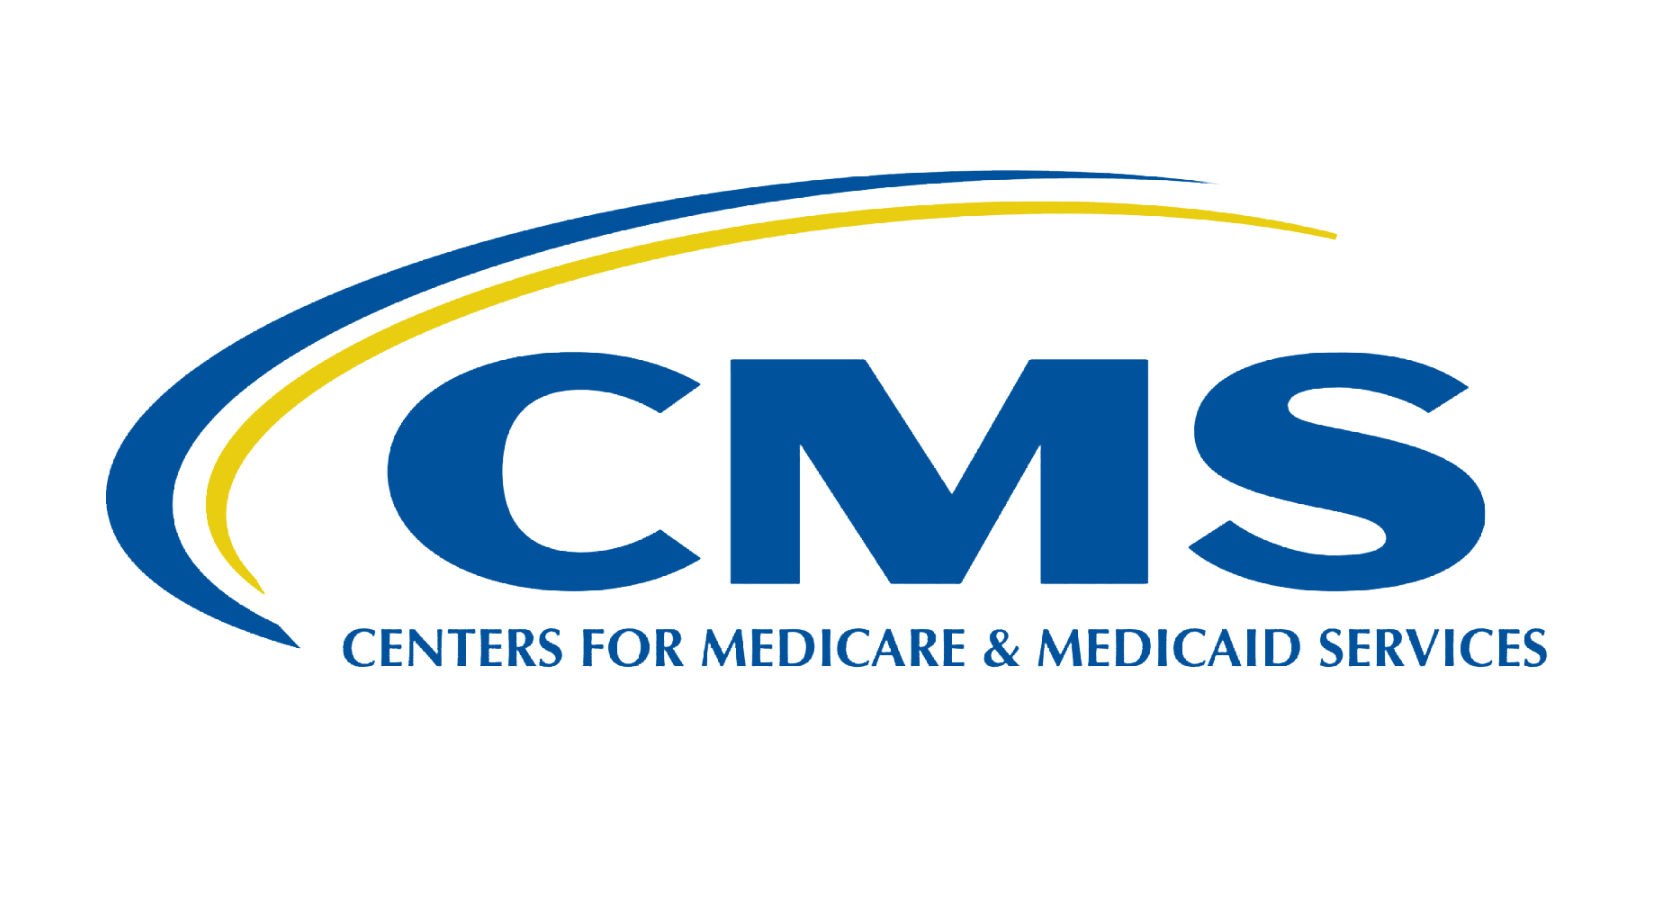 Center for Medicare and Medicaid Services